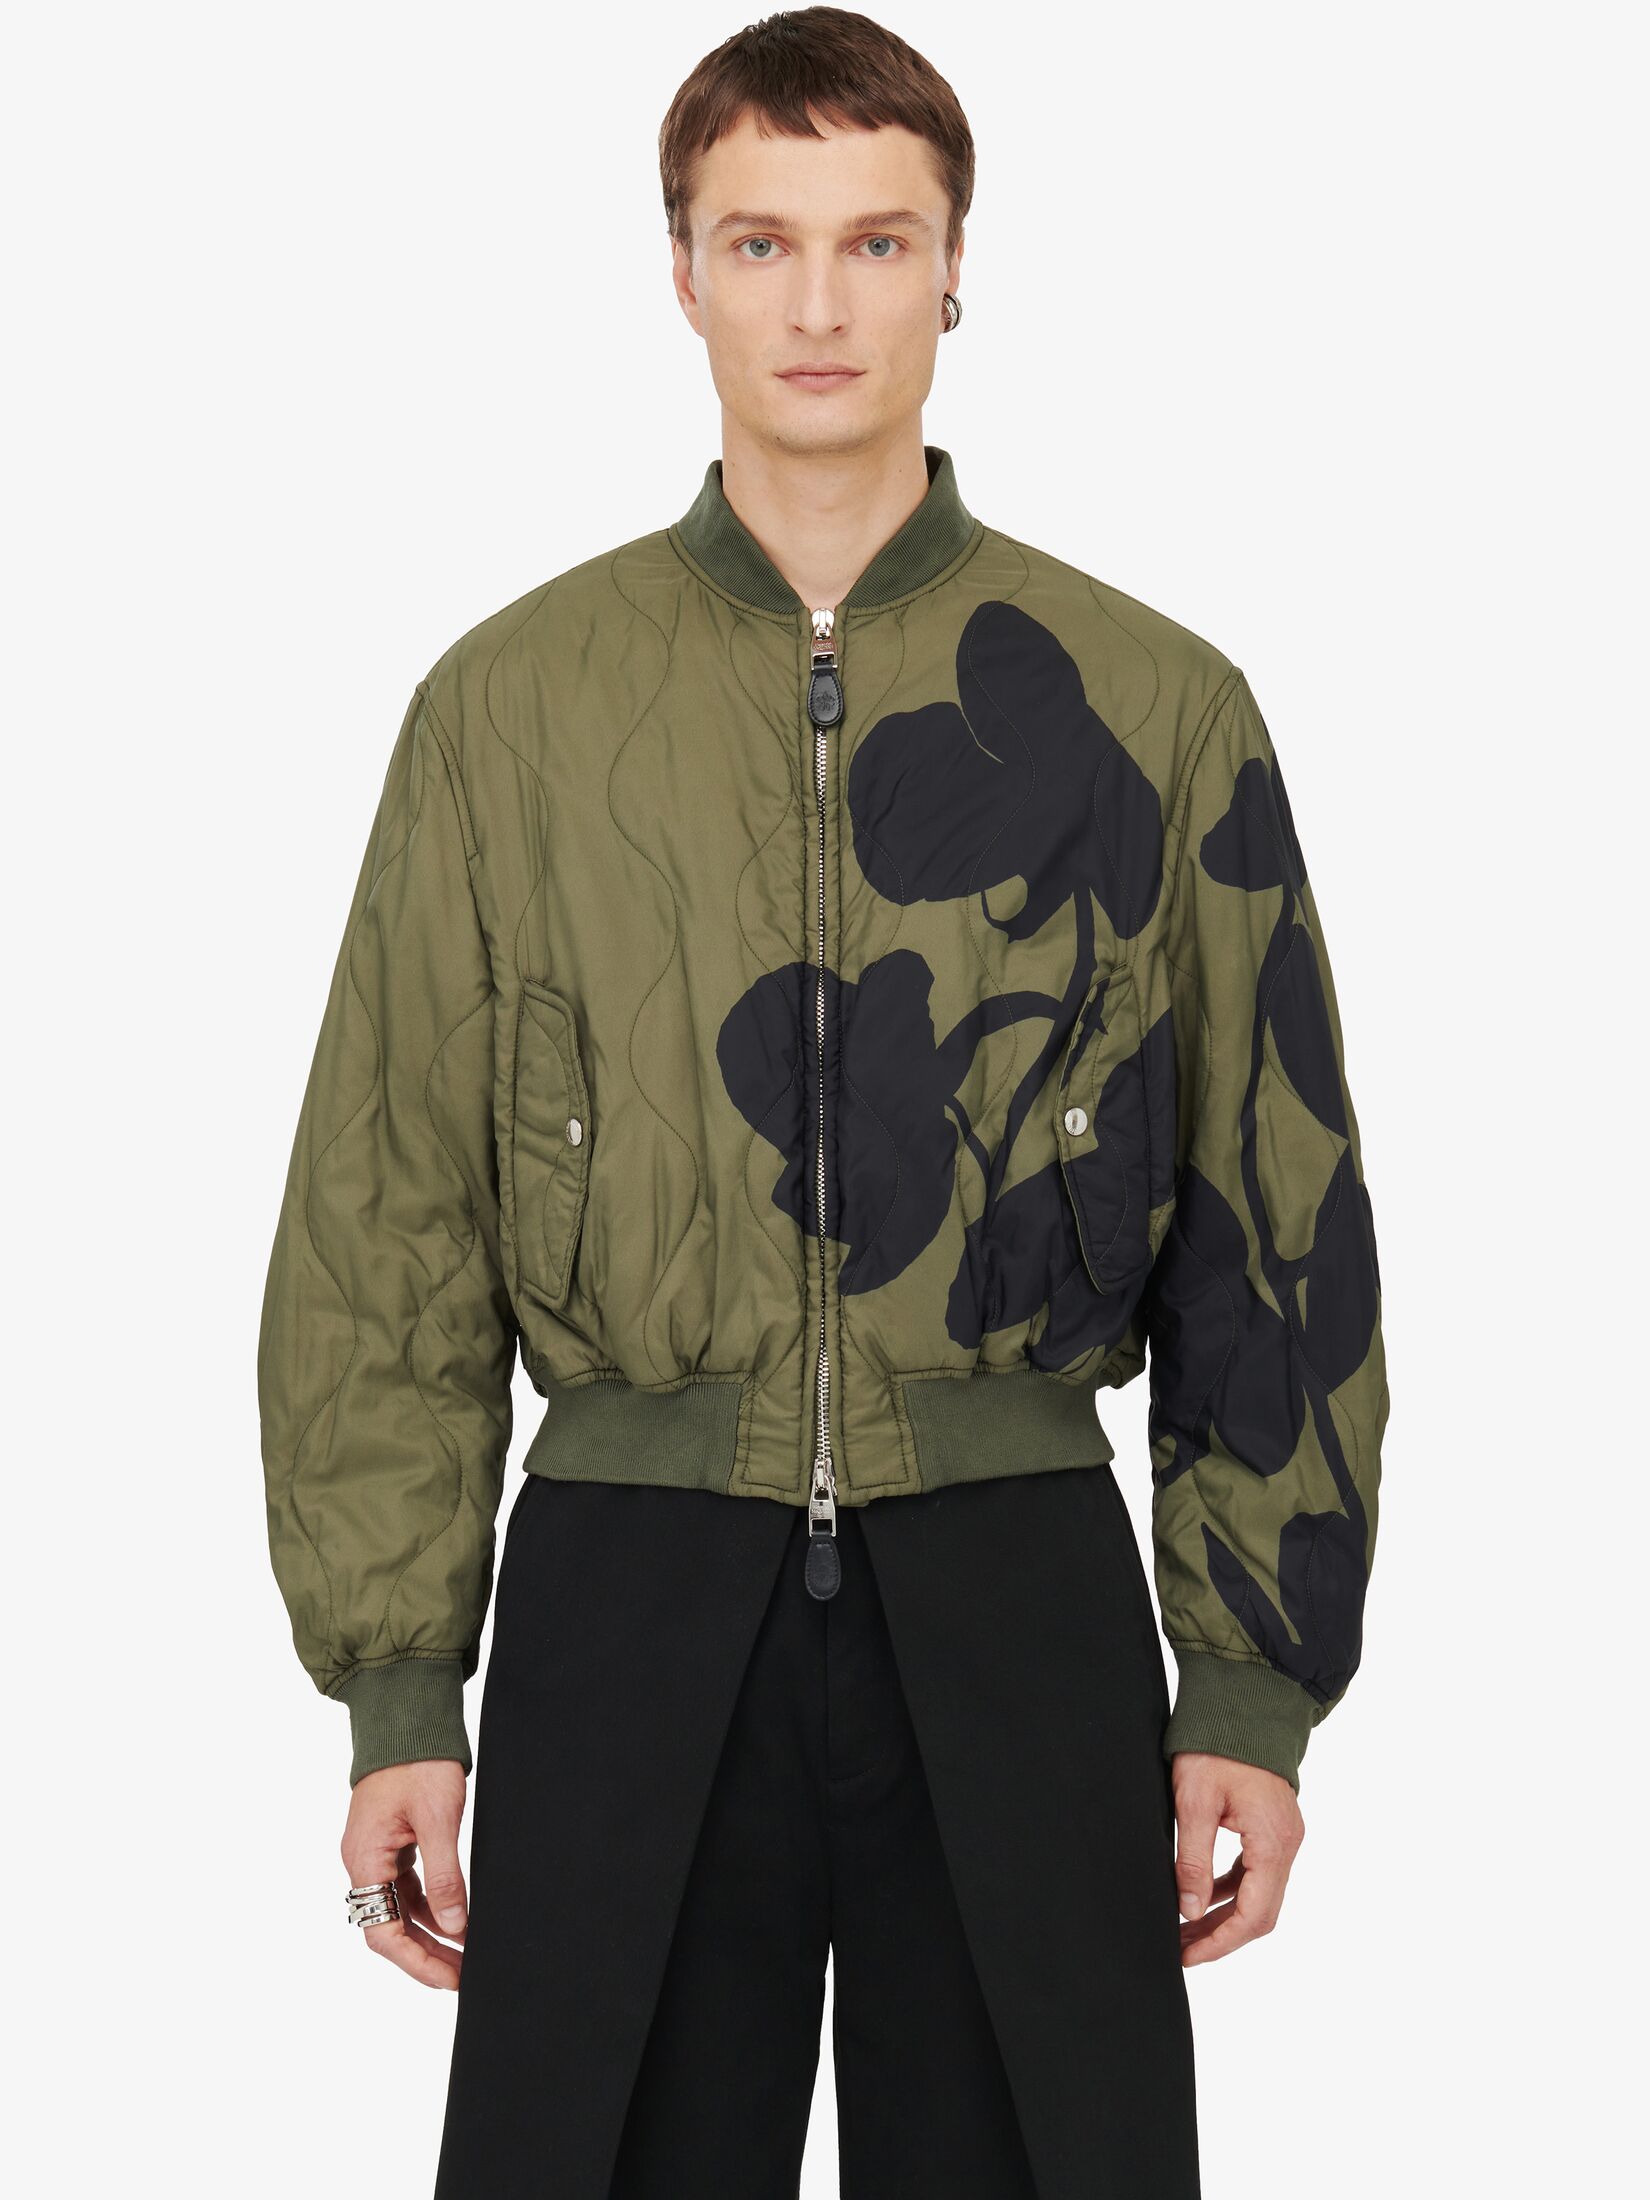 Orchid Bomber Jacket